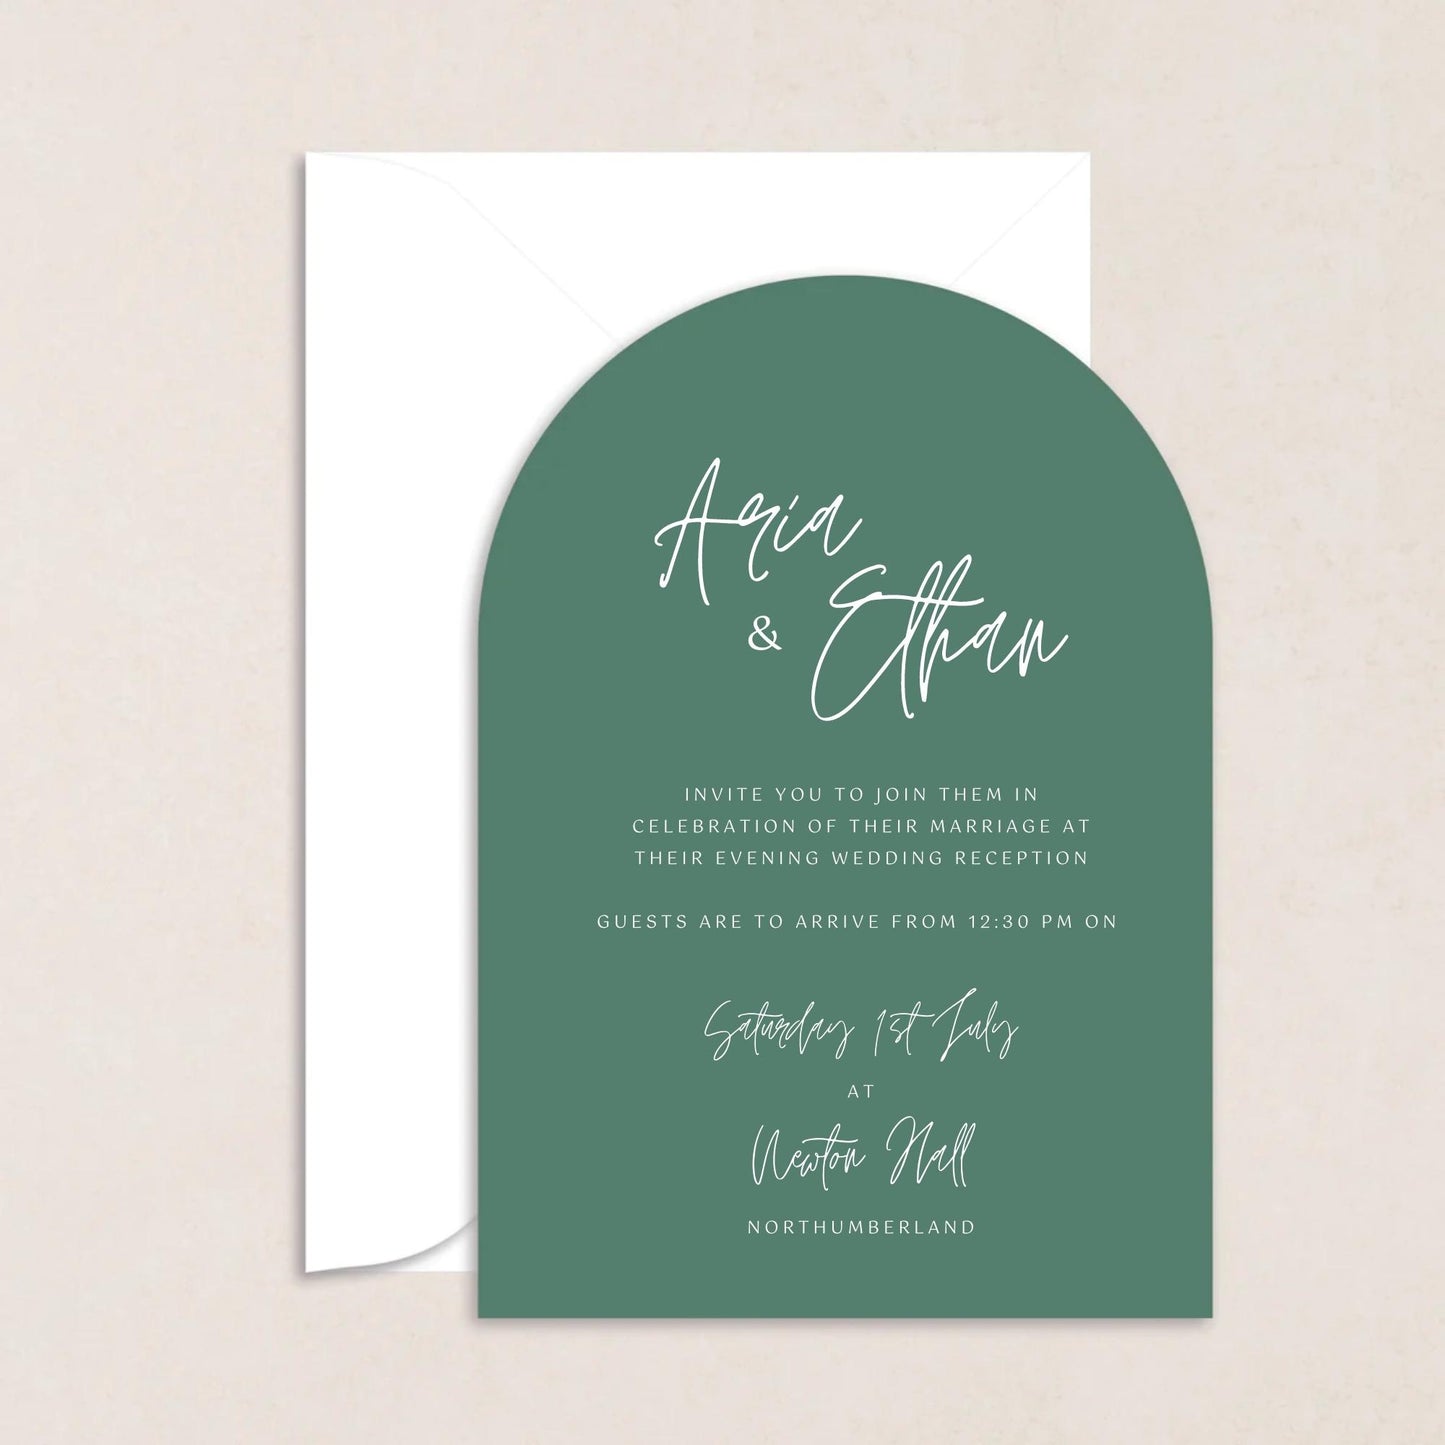 ARIA Wedding Invitations - Wedding Invitations available at The Ivy Collection | Luxury Wedding Stationery